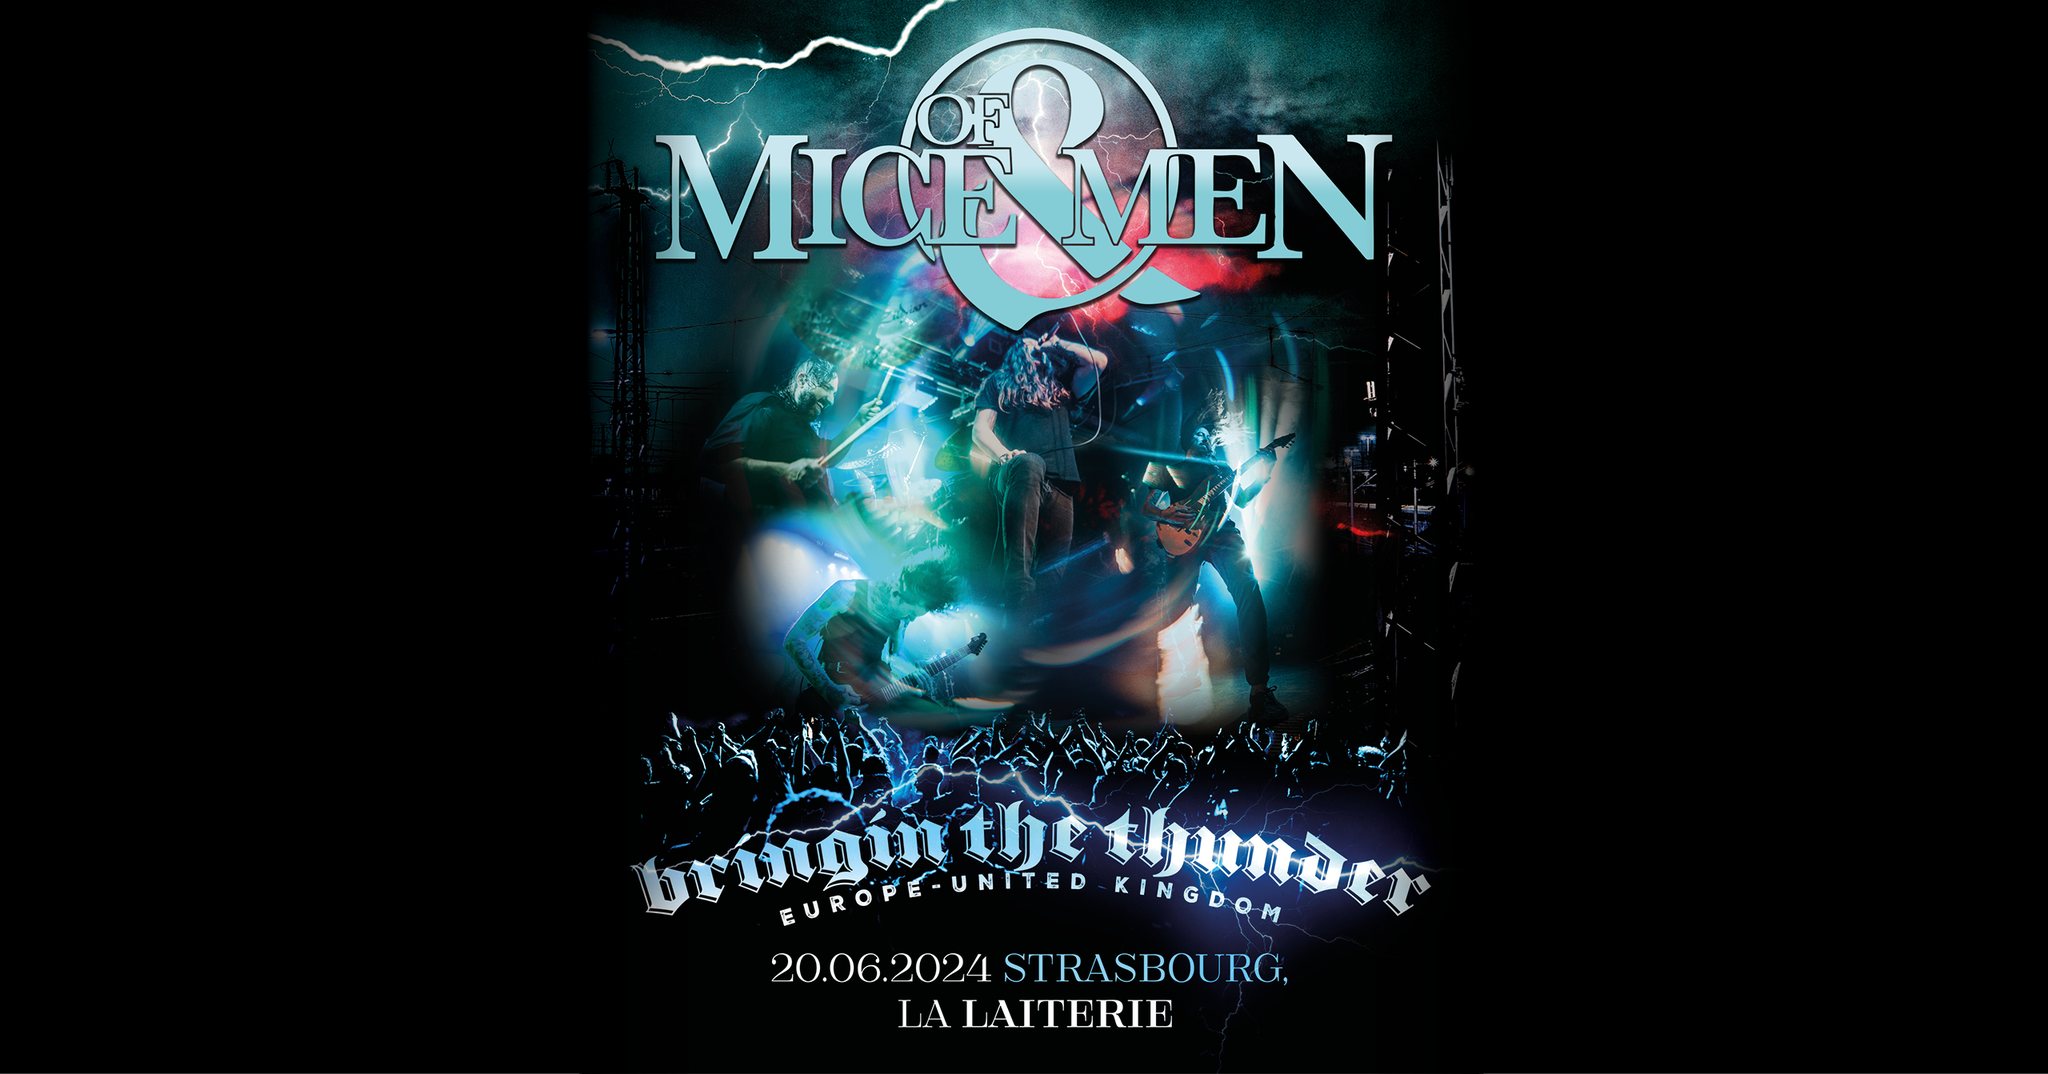 Of Mice and Men at La Laiterie Tickets